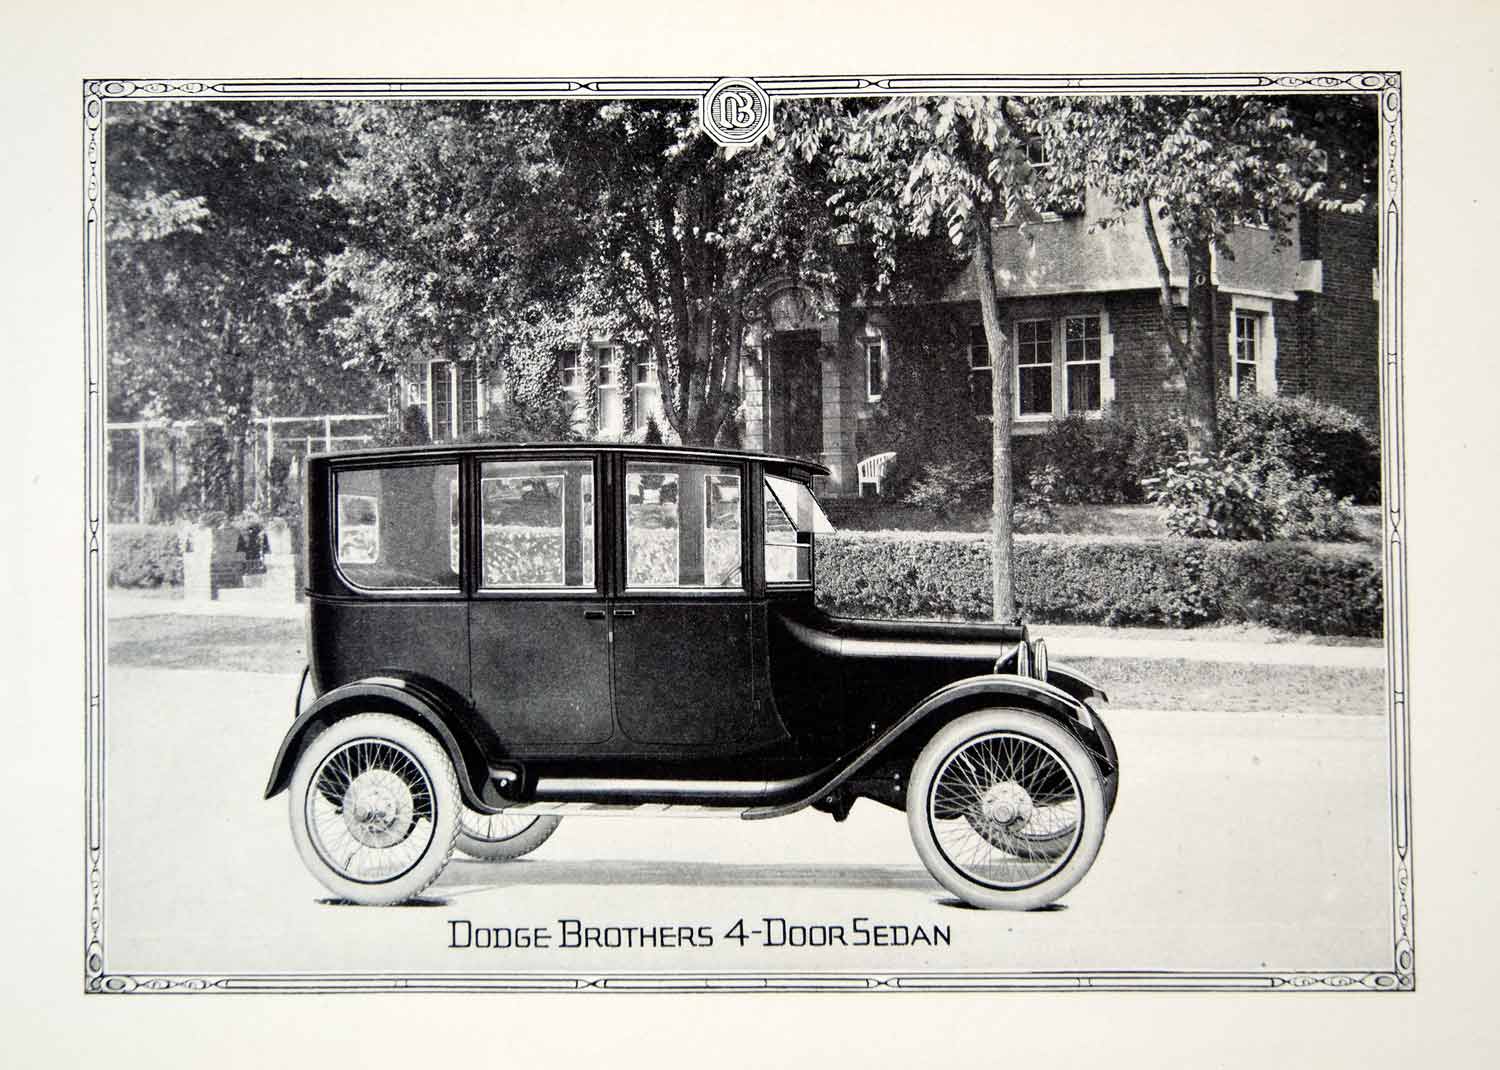 1919 Ad Dodge Brothers Four Door Sedan Covered Car Automobile Vehicle Image YNG4